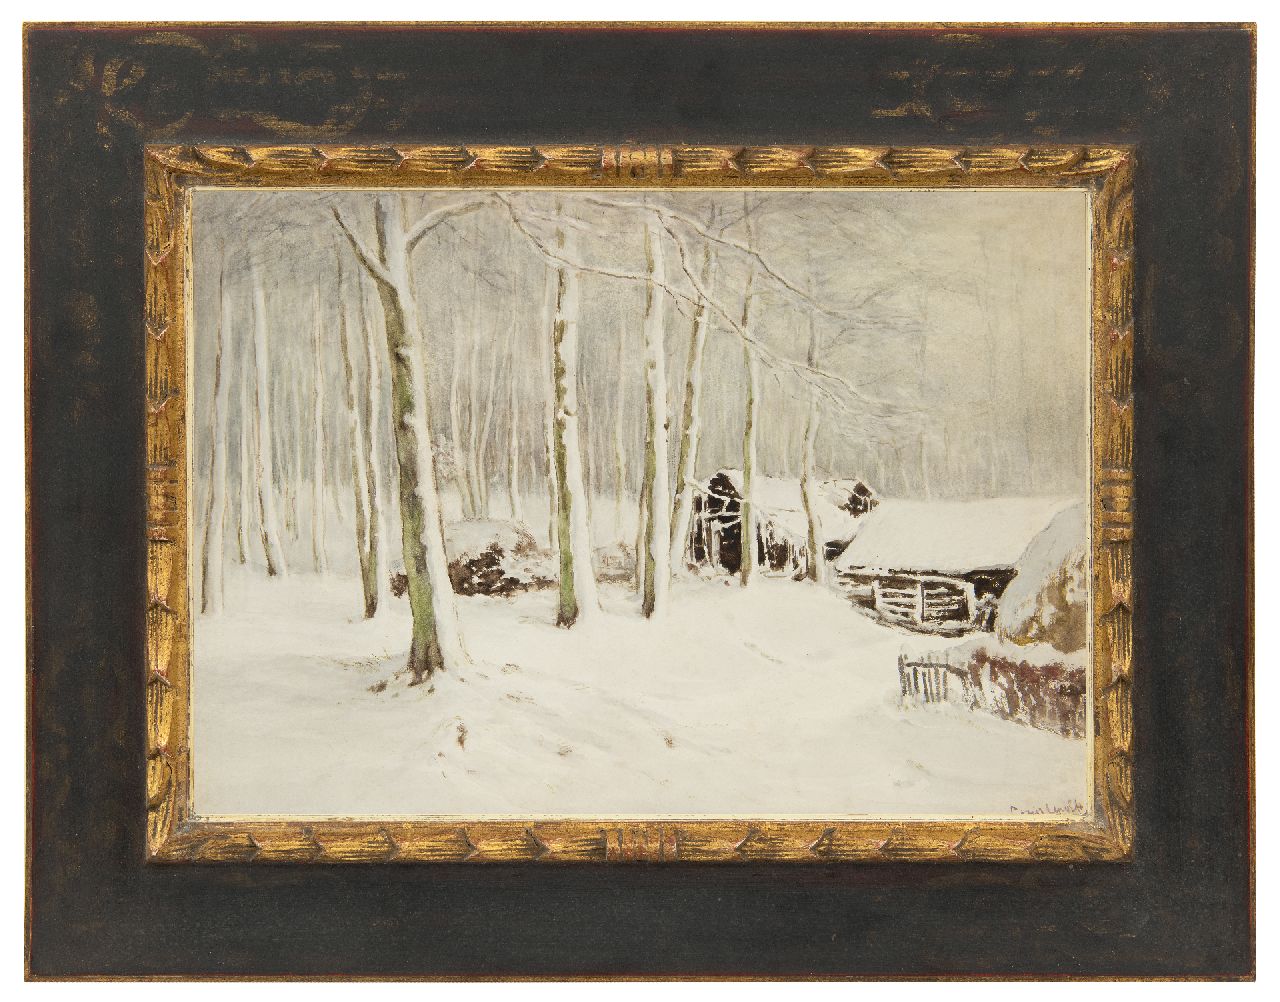 Apol L.F.H.  | Lodewijk Franciscus Hendrik 'Louis' Apol | Watercolours and drawings offered for sale | Snowy barns in the forest, gouache on paper 36.5 x 52.1 cm, signed l.r.